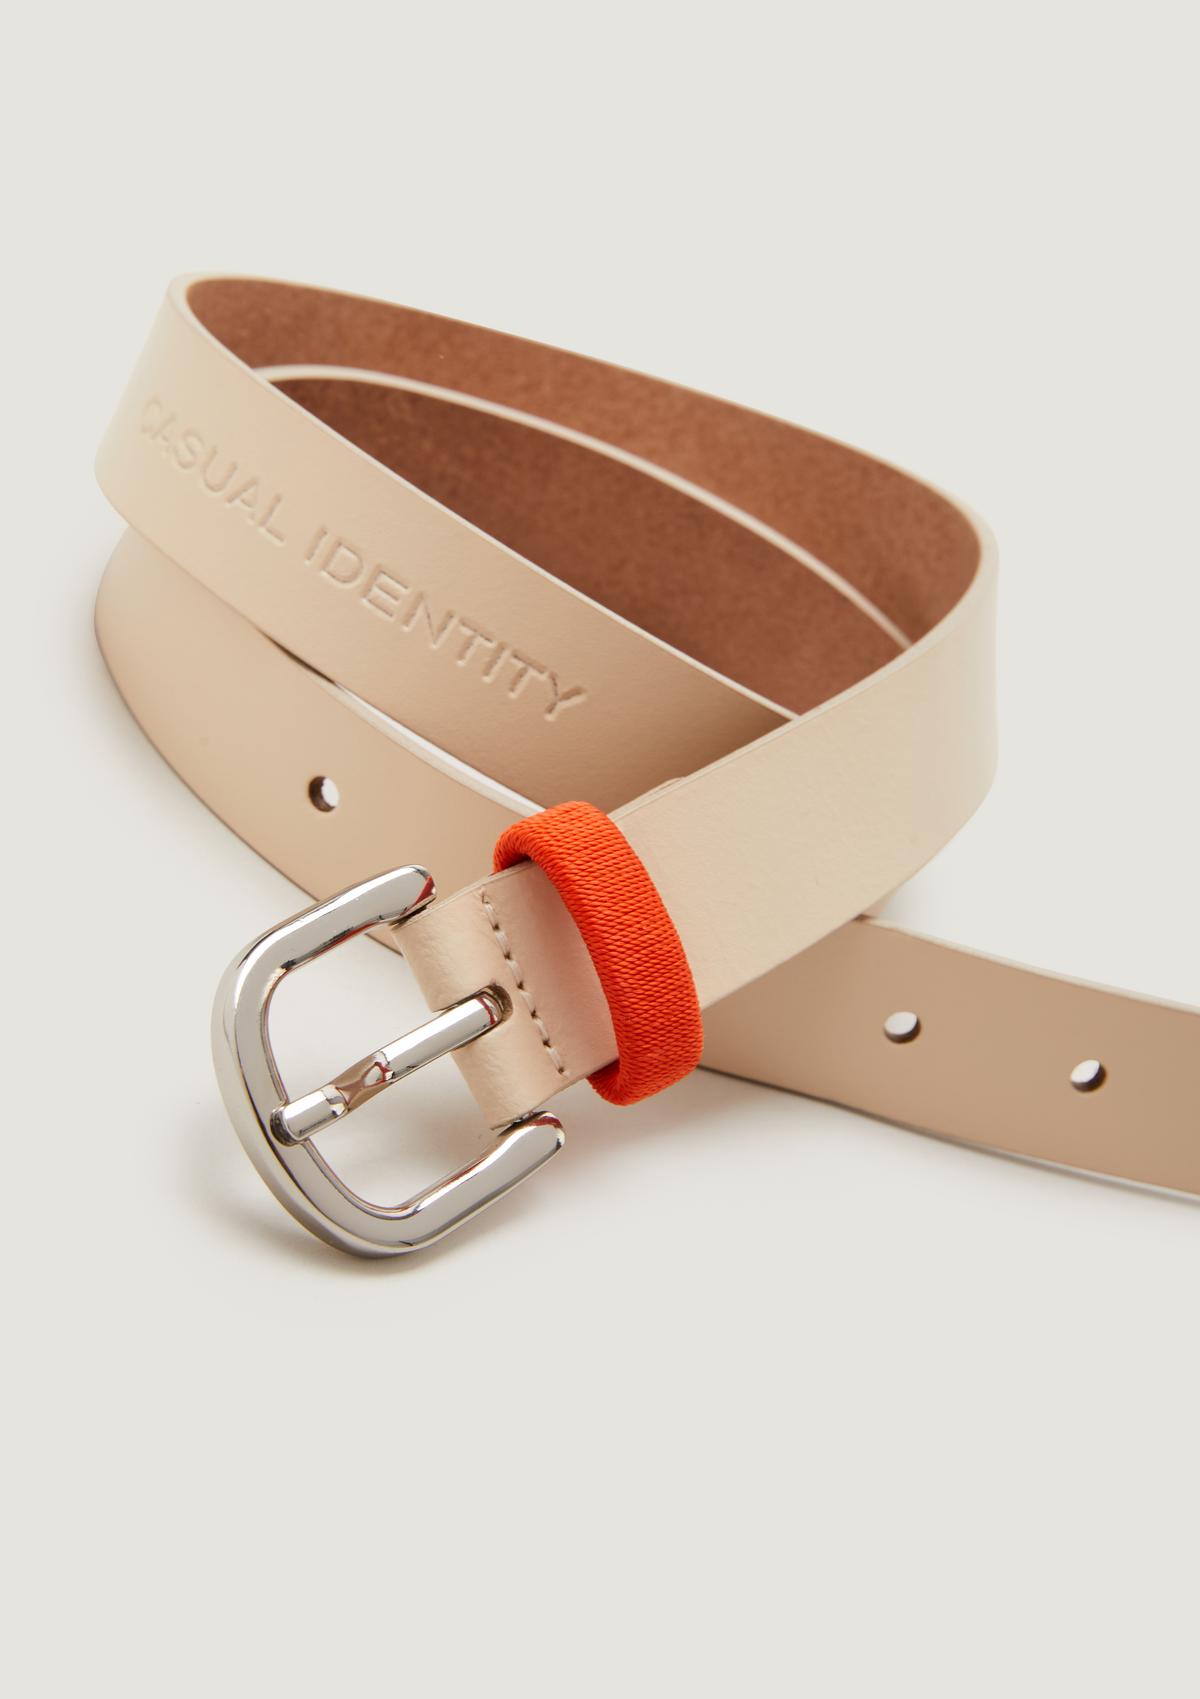 comma Belt with contrasting details